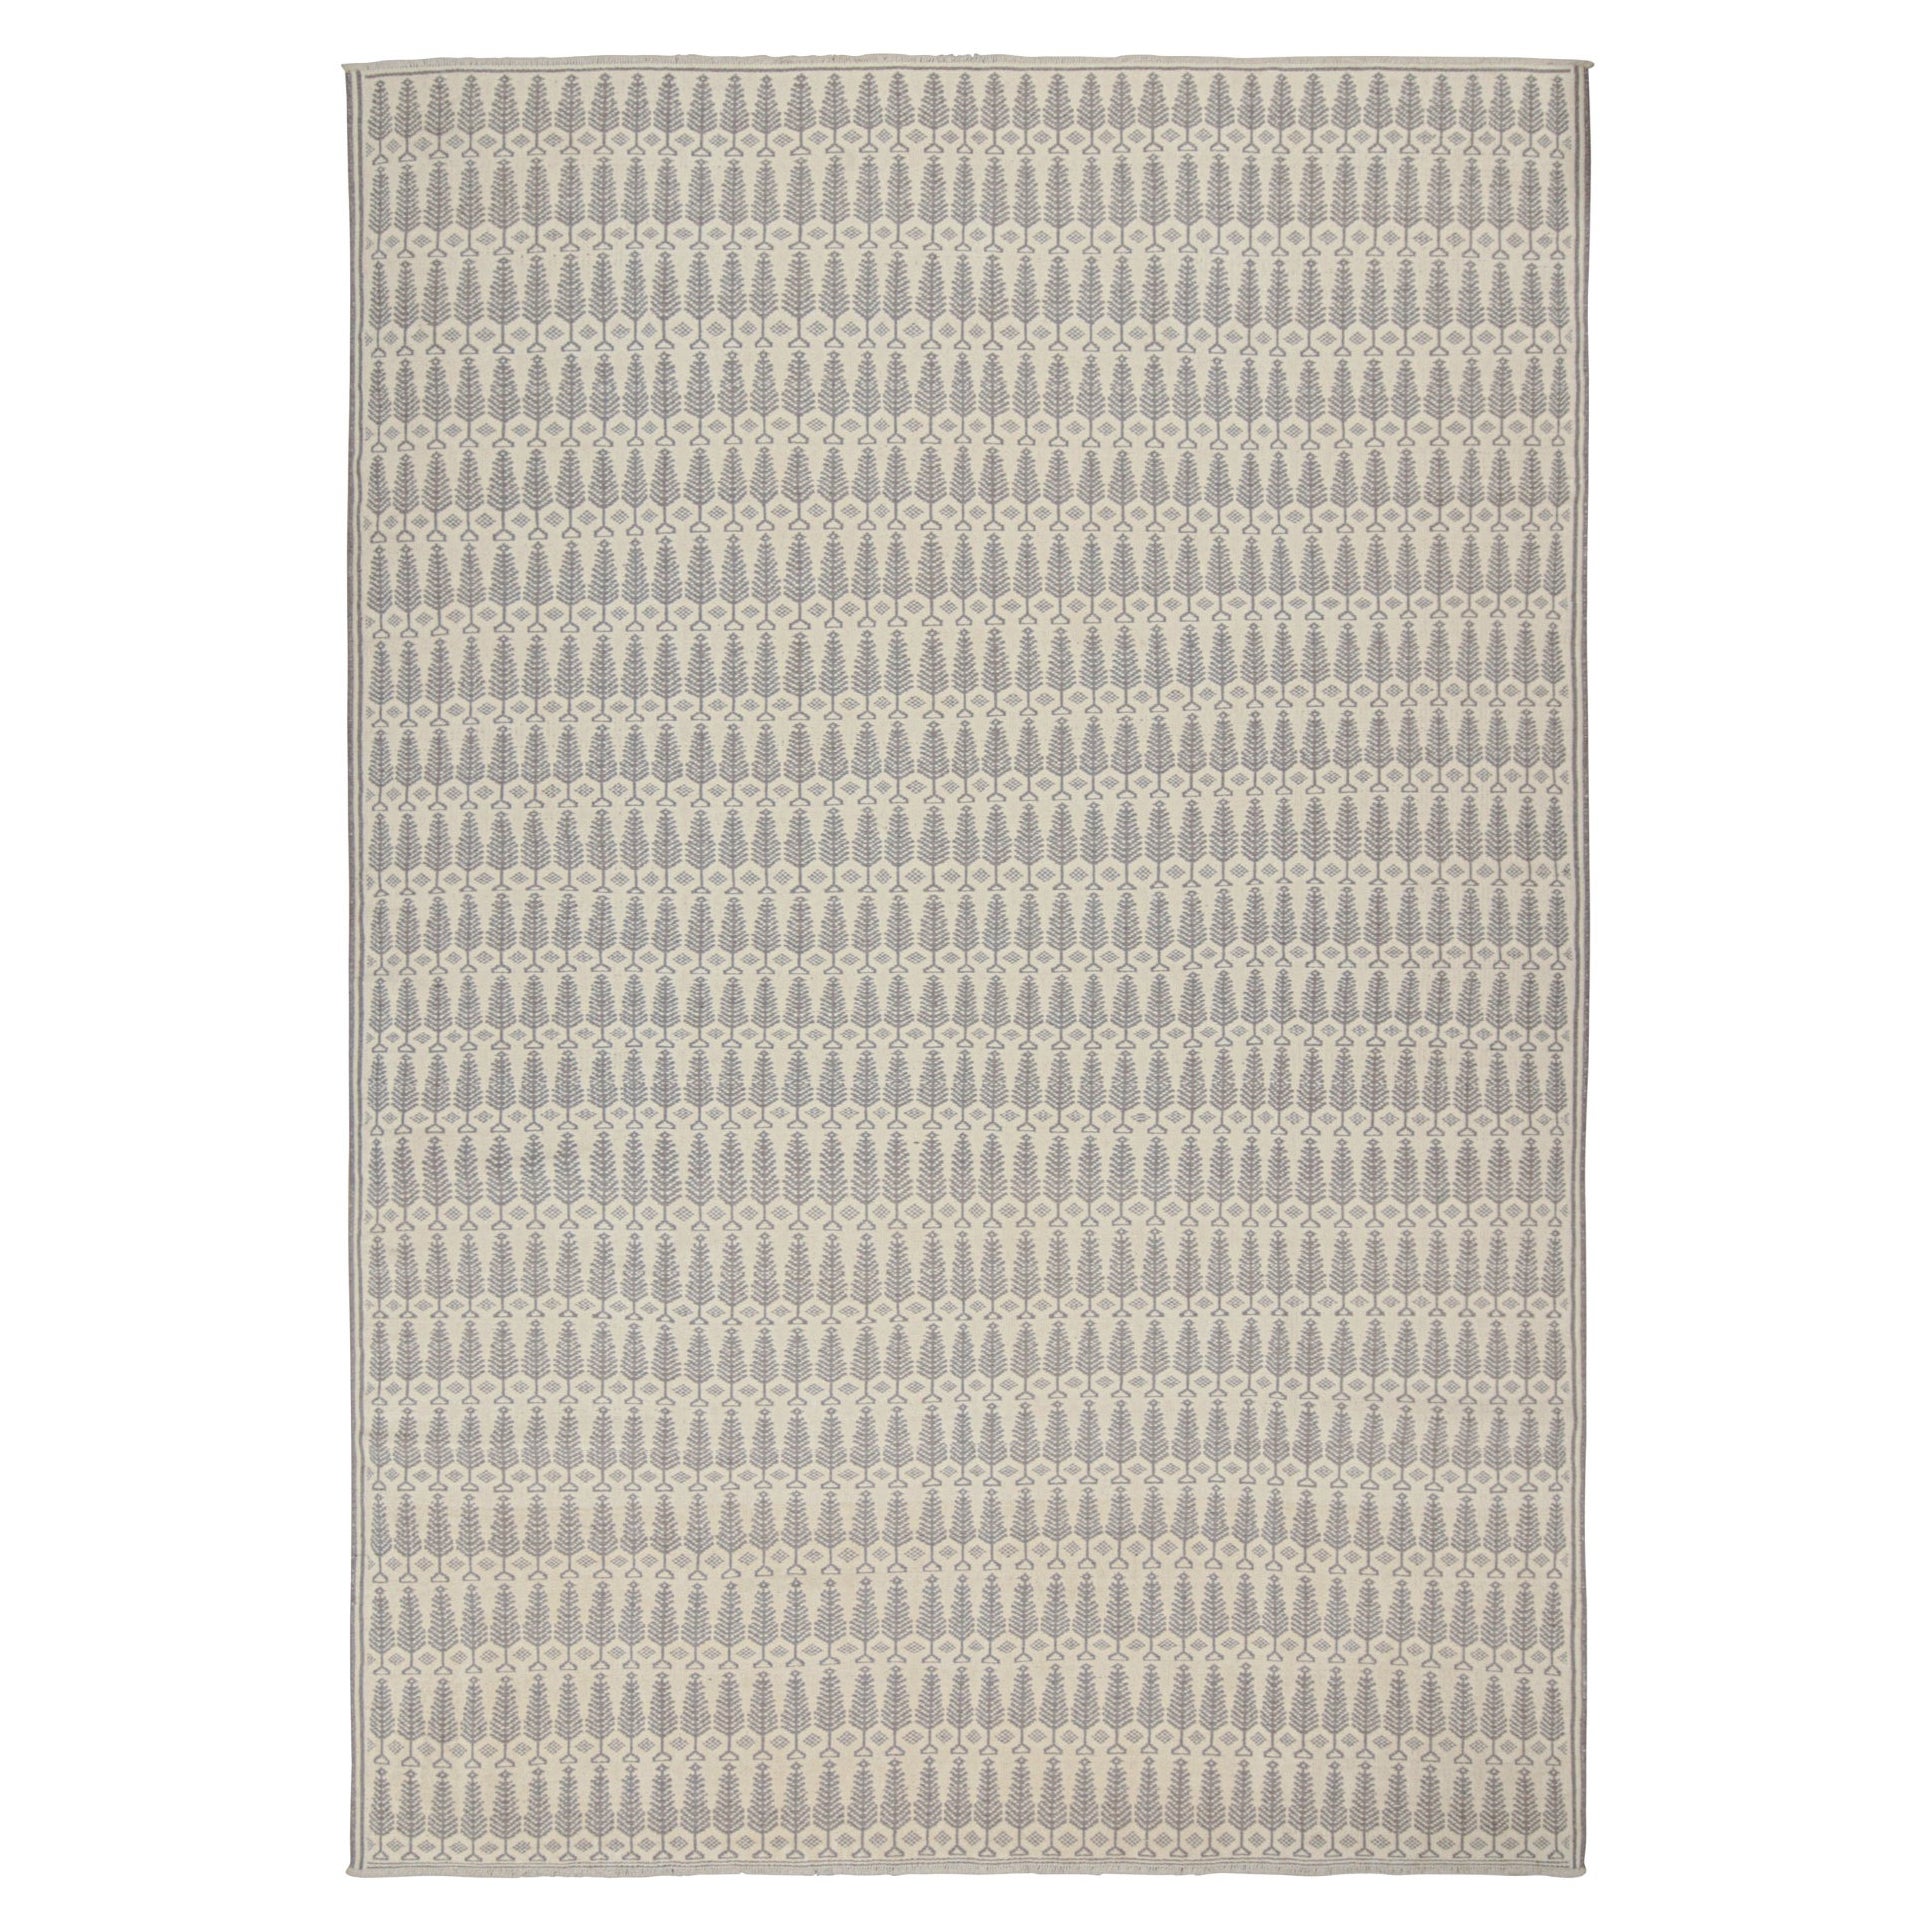 Rug & Kilim’s Zilu Style Kilim in White with Gray Floral Pattern